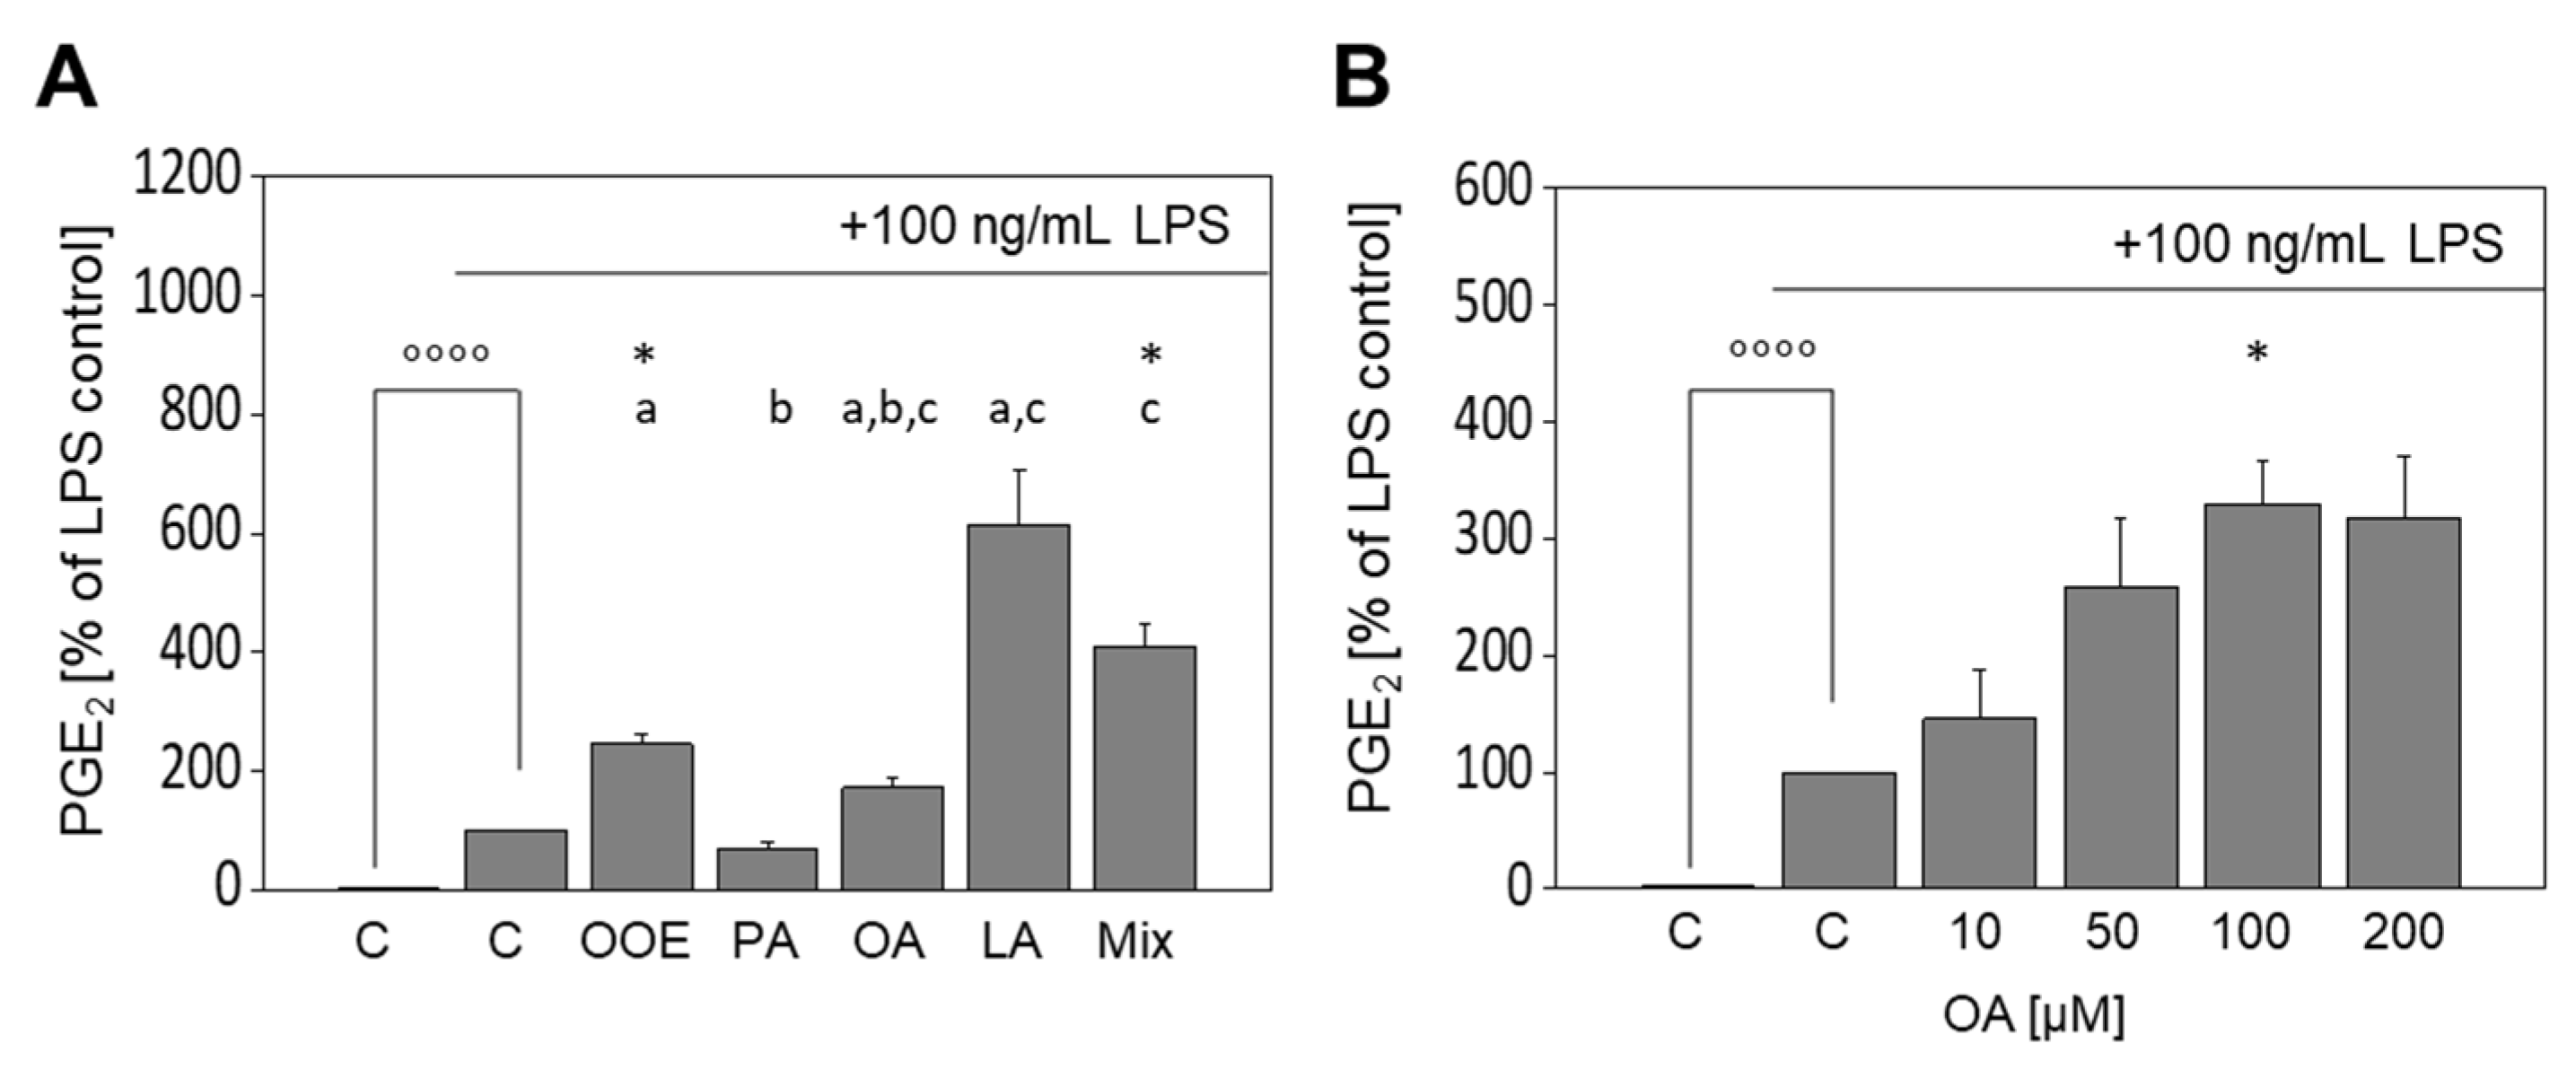 Nutrients | Free Full-Text | Olive Oil Extracts and Oleic Acid Attenuate  the LPS-Induced Inflammatory Response in Murine RAW264.7 Macrophages but  Induce the Release of Prostaglandin E2 | HTML